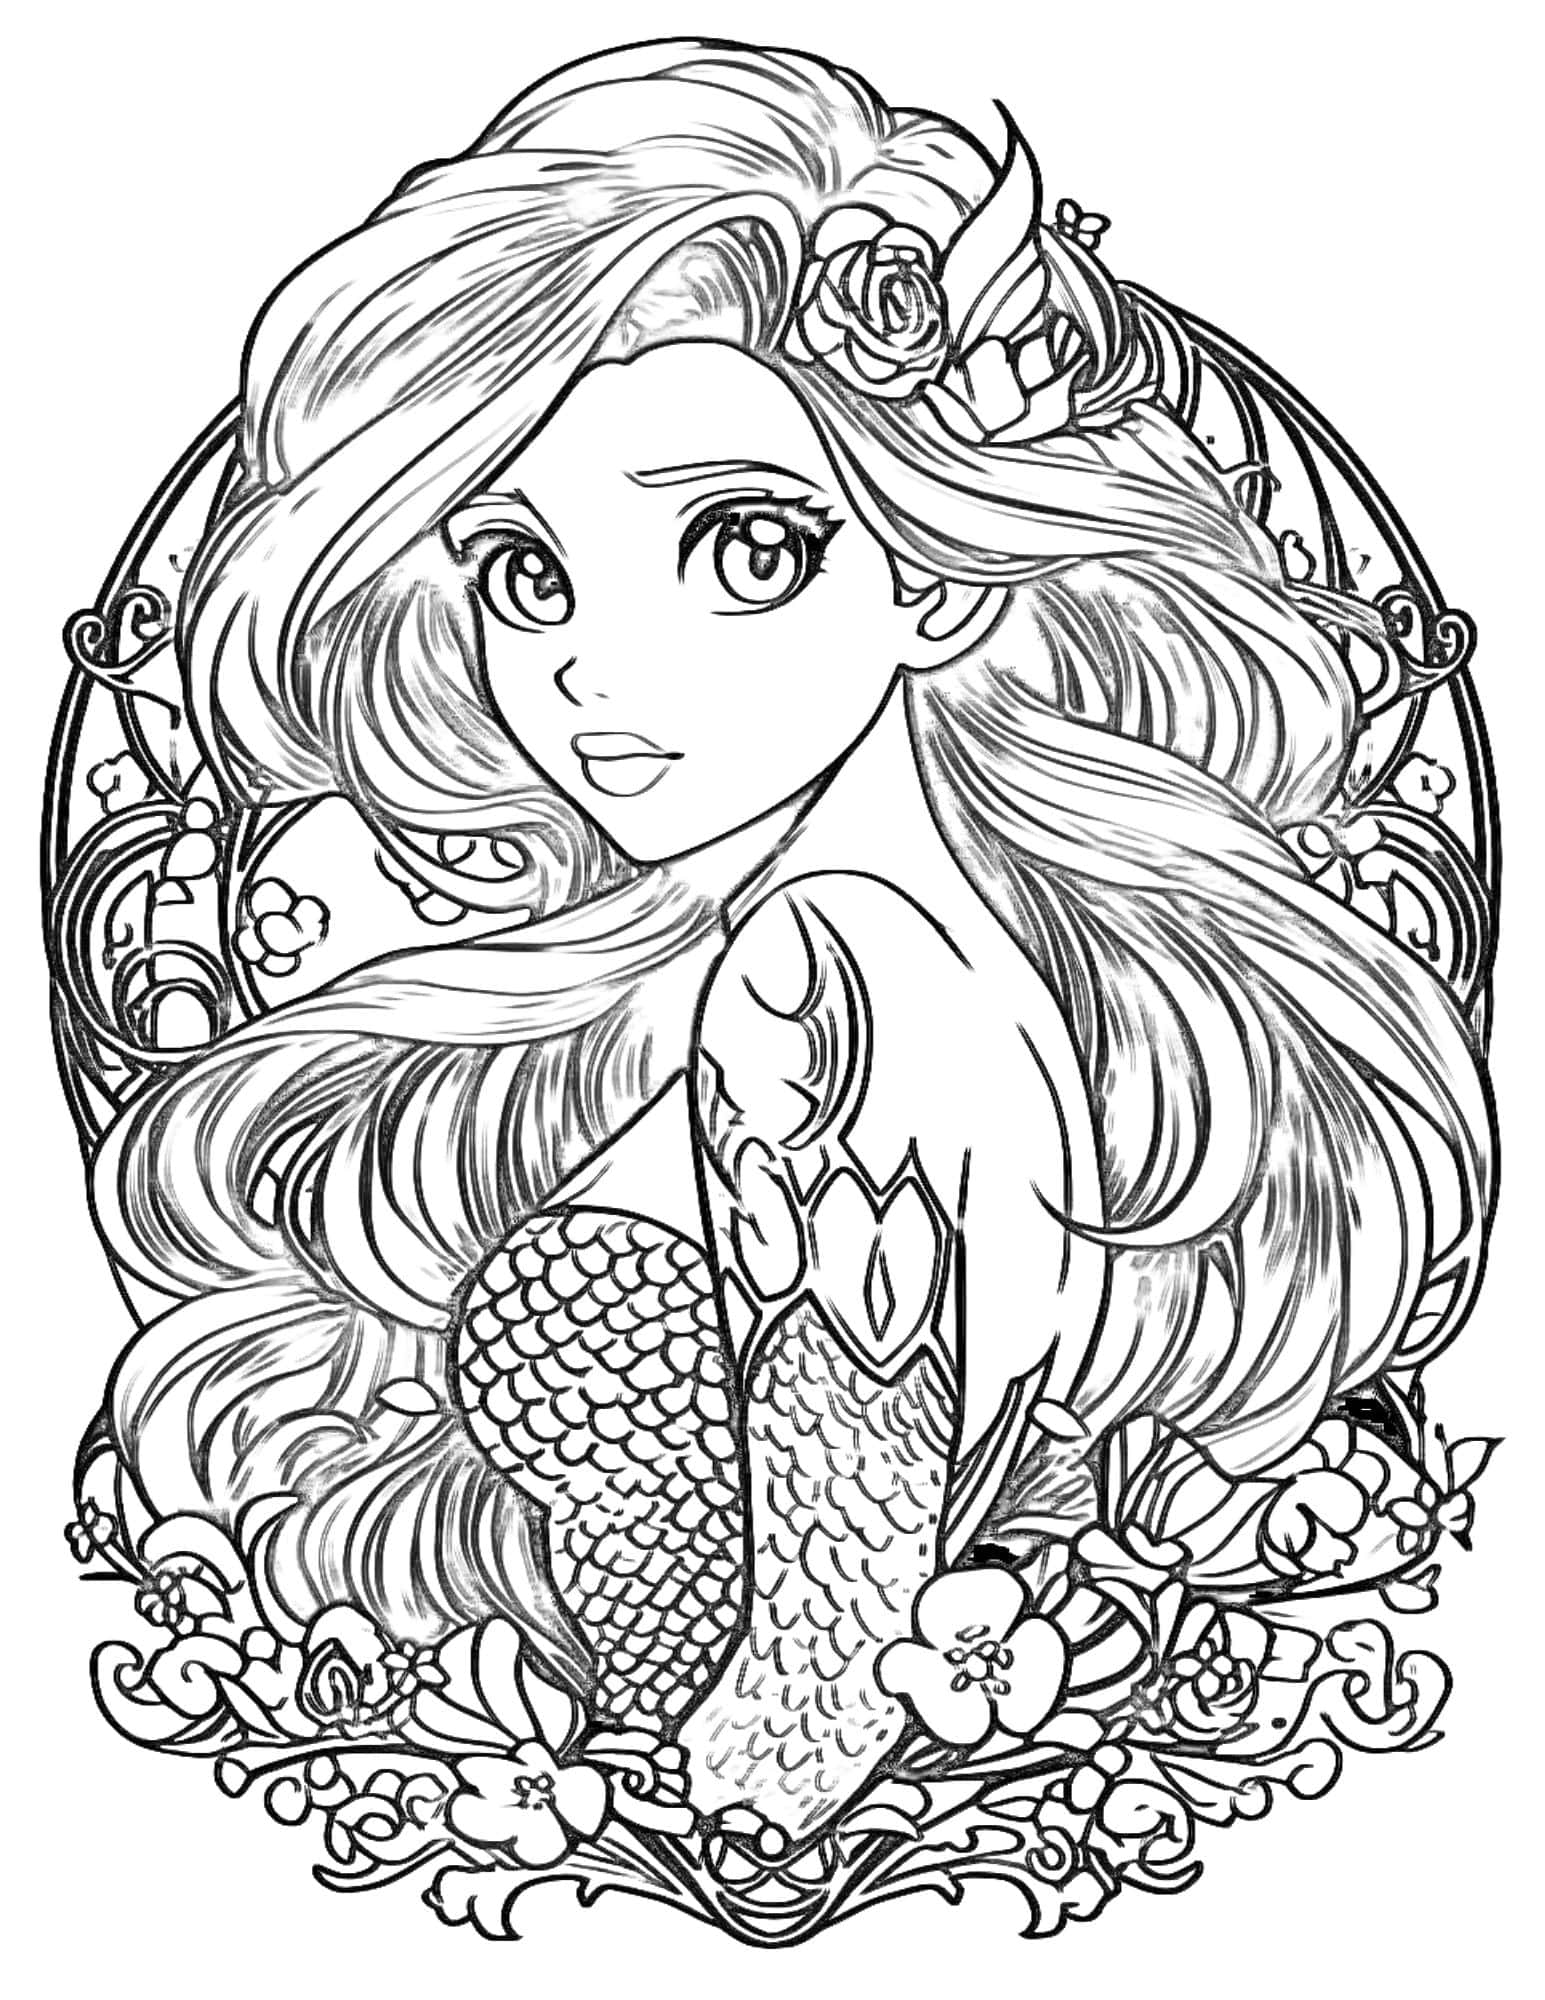 Anime Coloring Pages For Kids & Adults - World of Printables